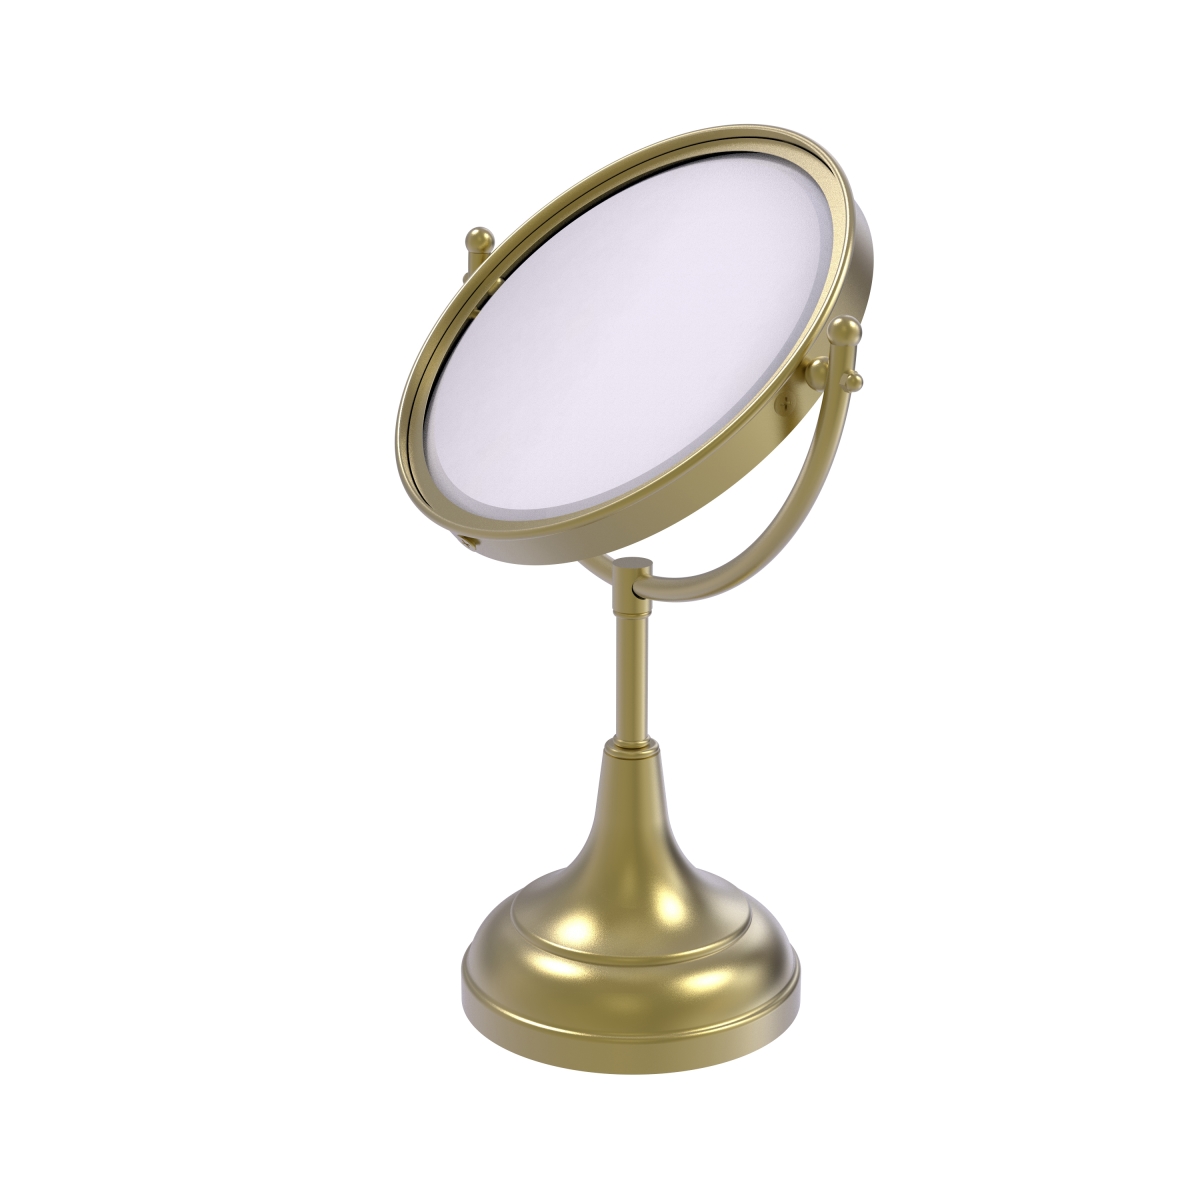 Dm-2-2x-sbr Dotted Ring Style 8 In. Vanity Top Make-up Mirror 2x Magnification, Satin Brass